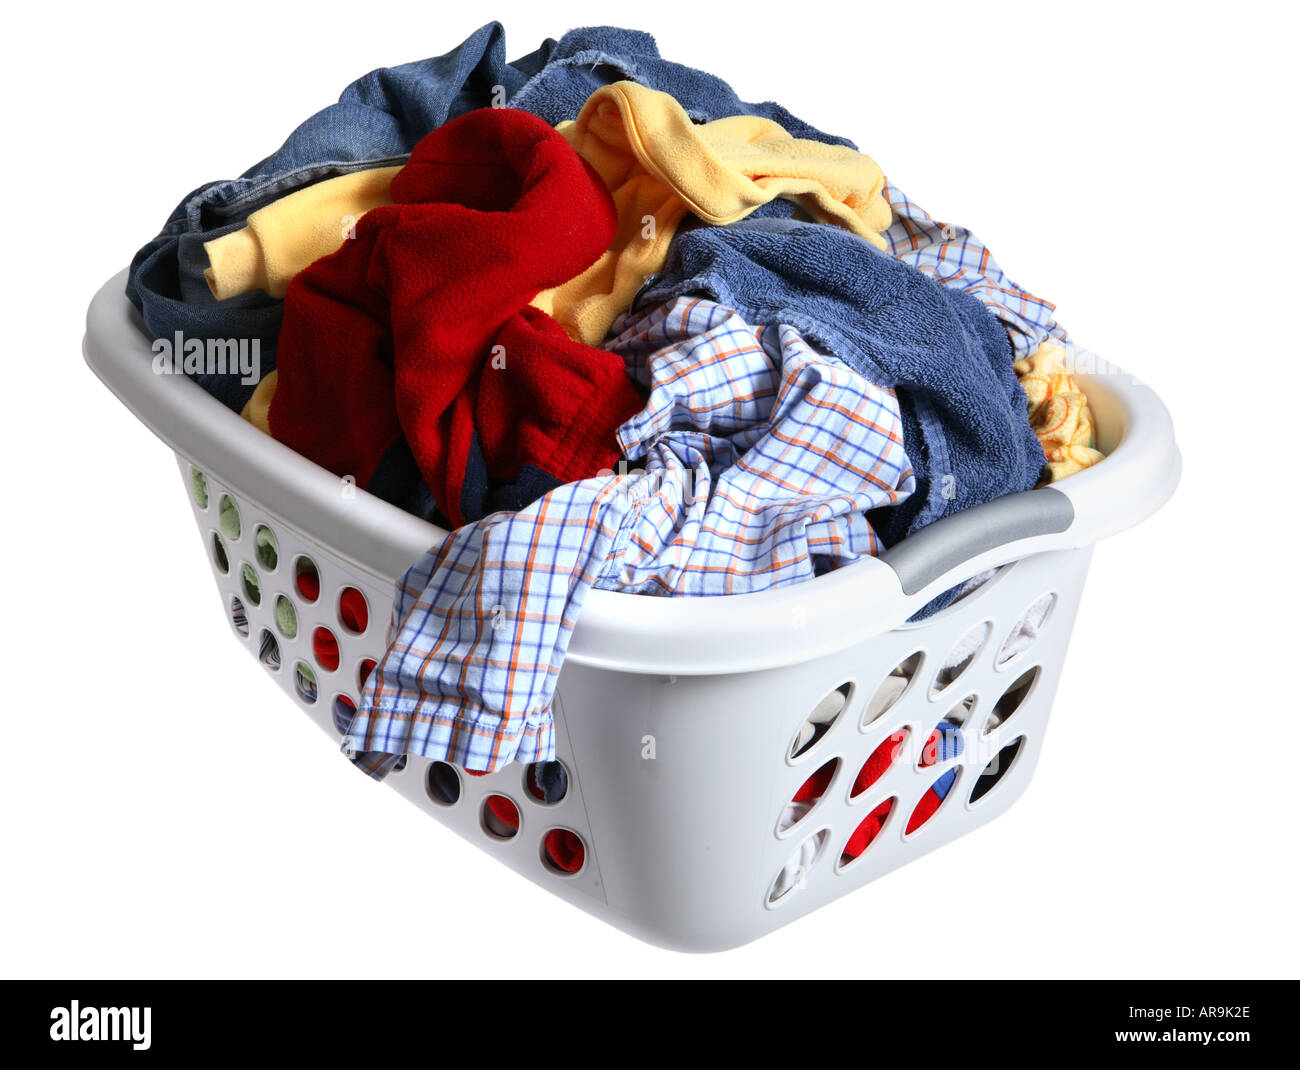 Laundry basket full of dirty clothes Stock Photo